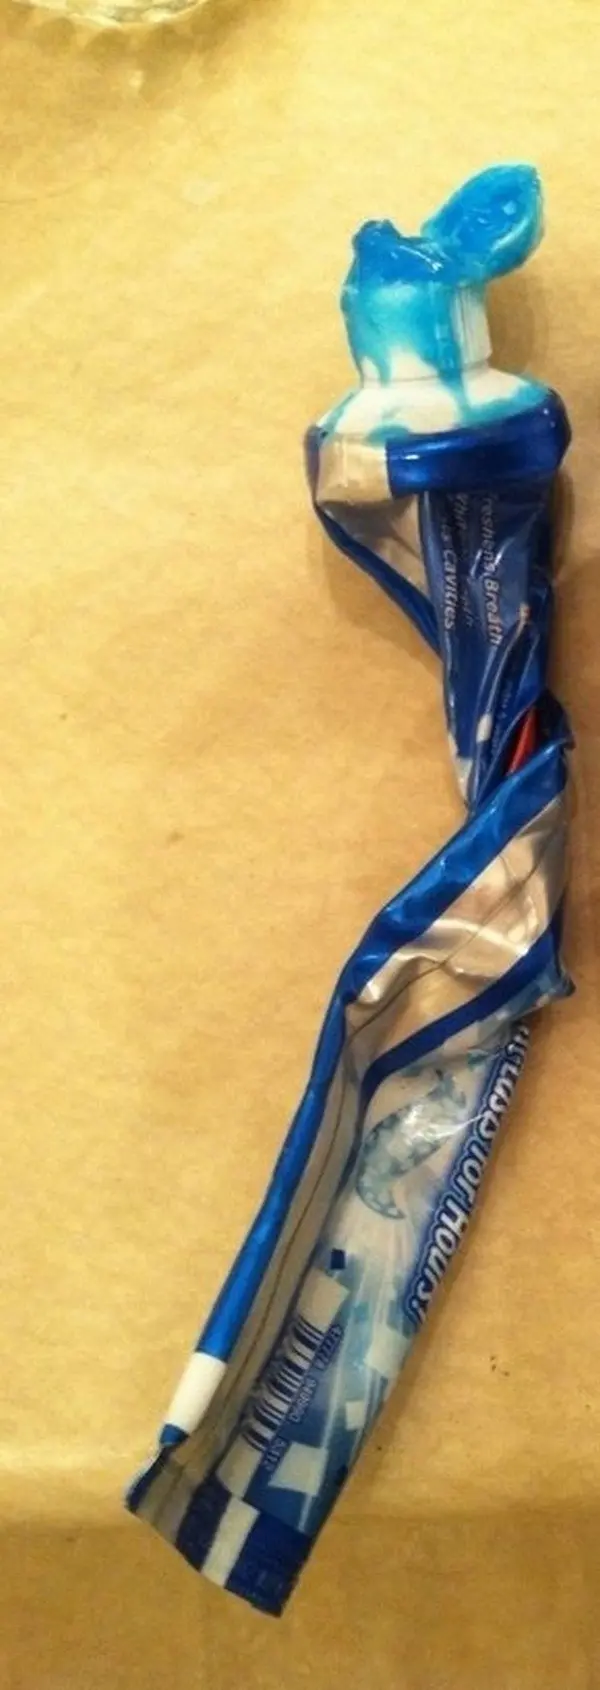 twisted toothpaste tube